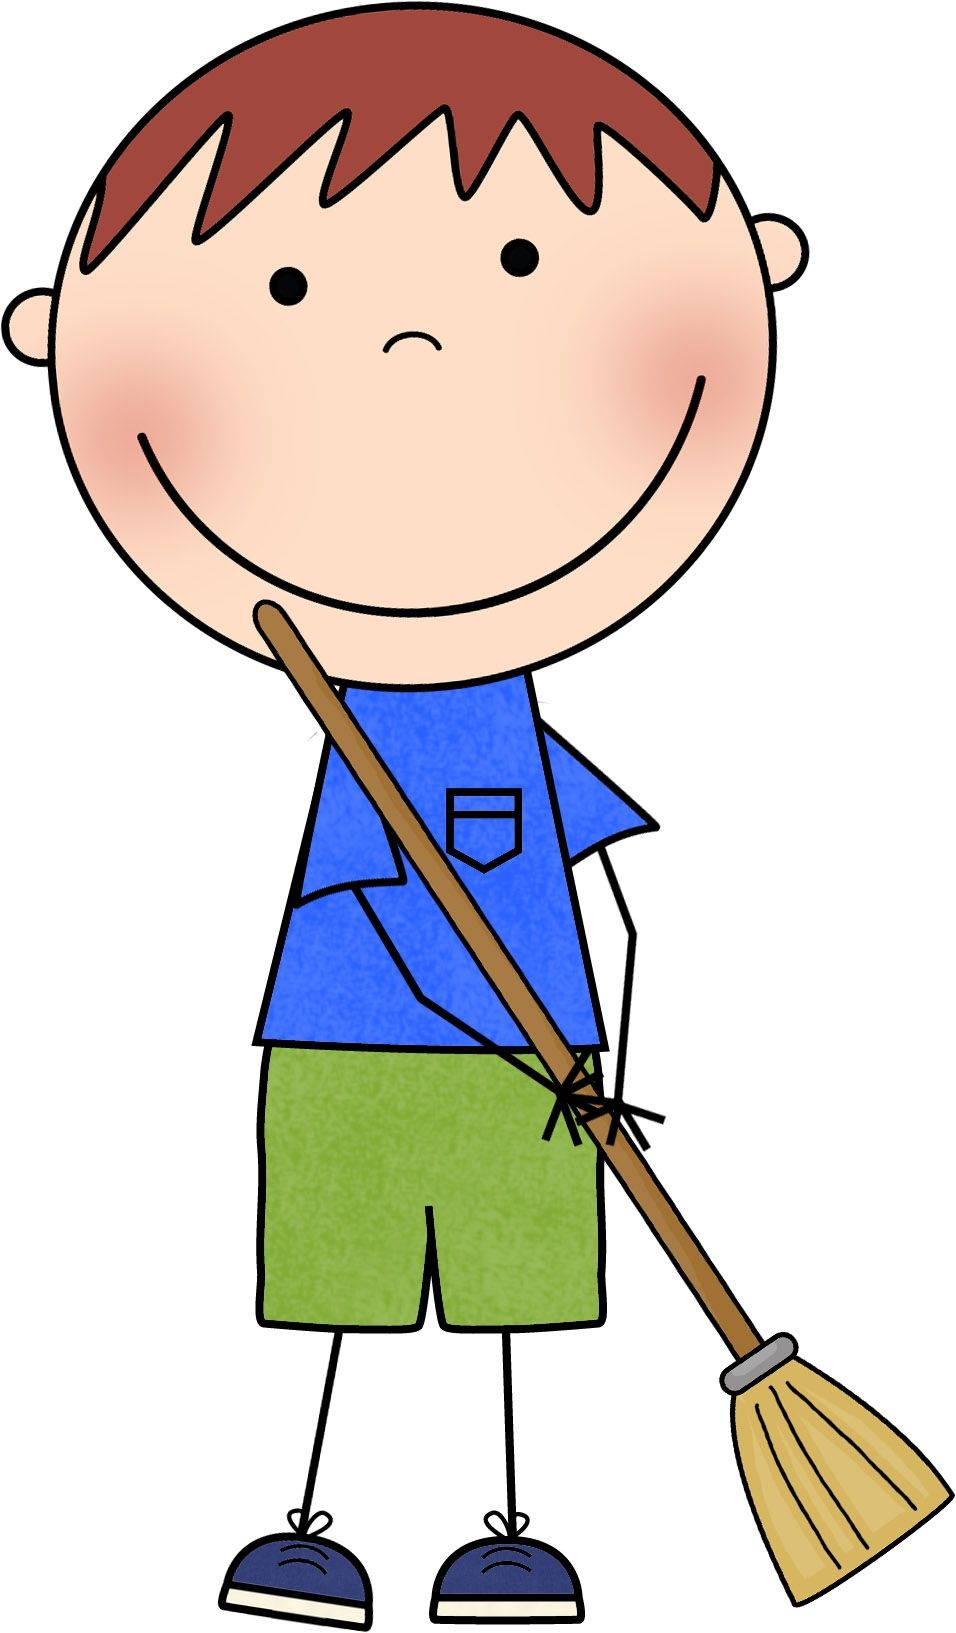 Cleaning at getdrawings com. Bra clipart kid